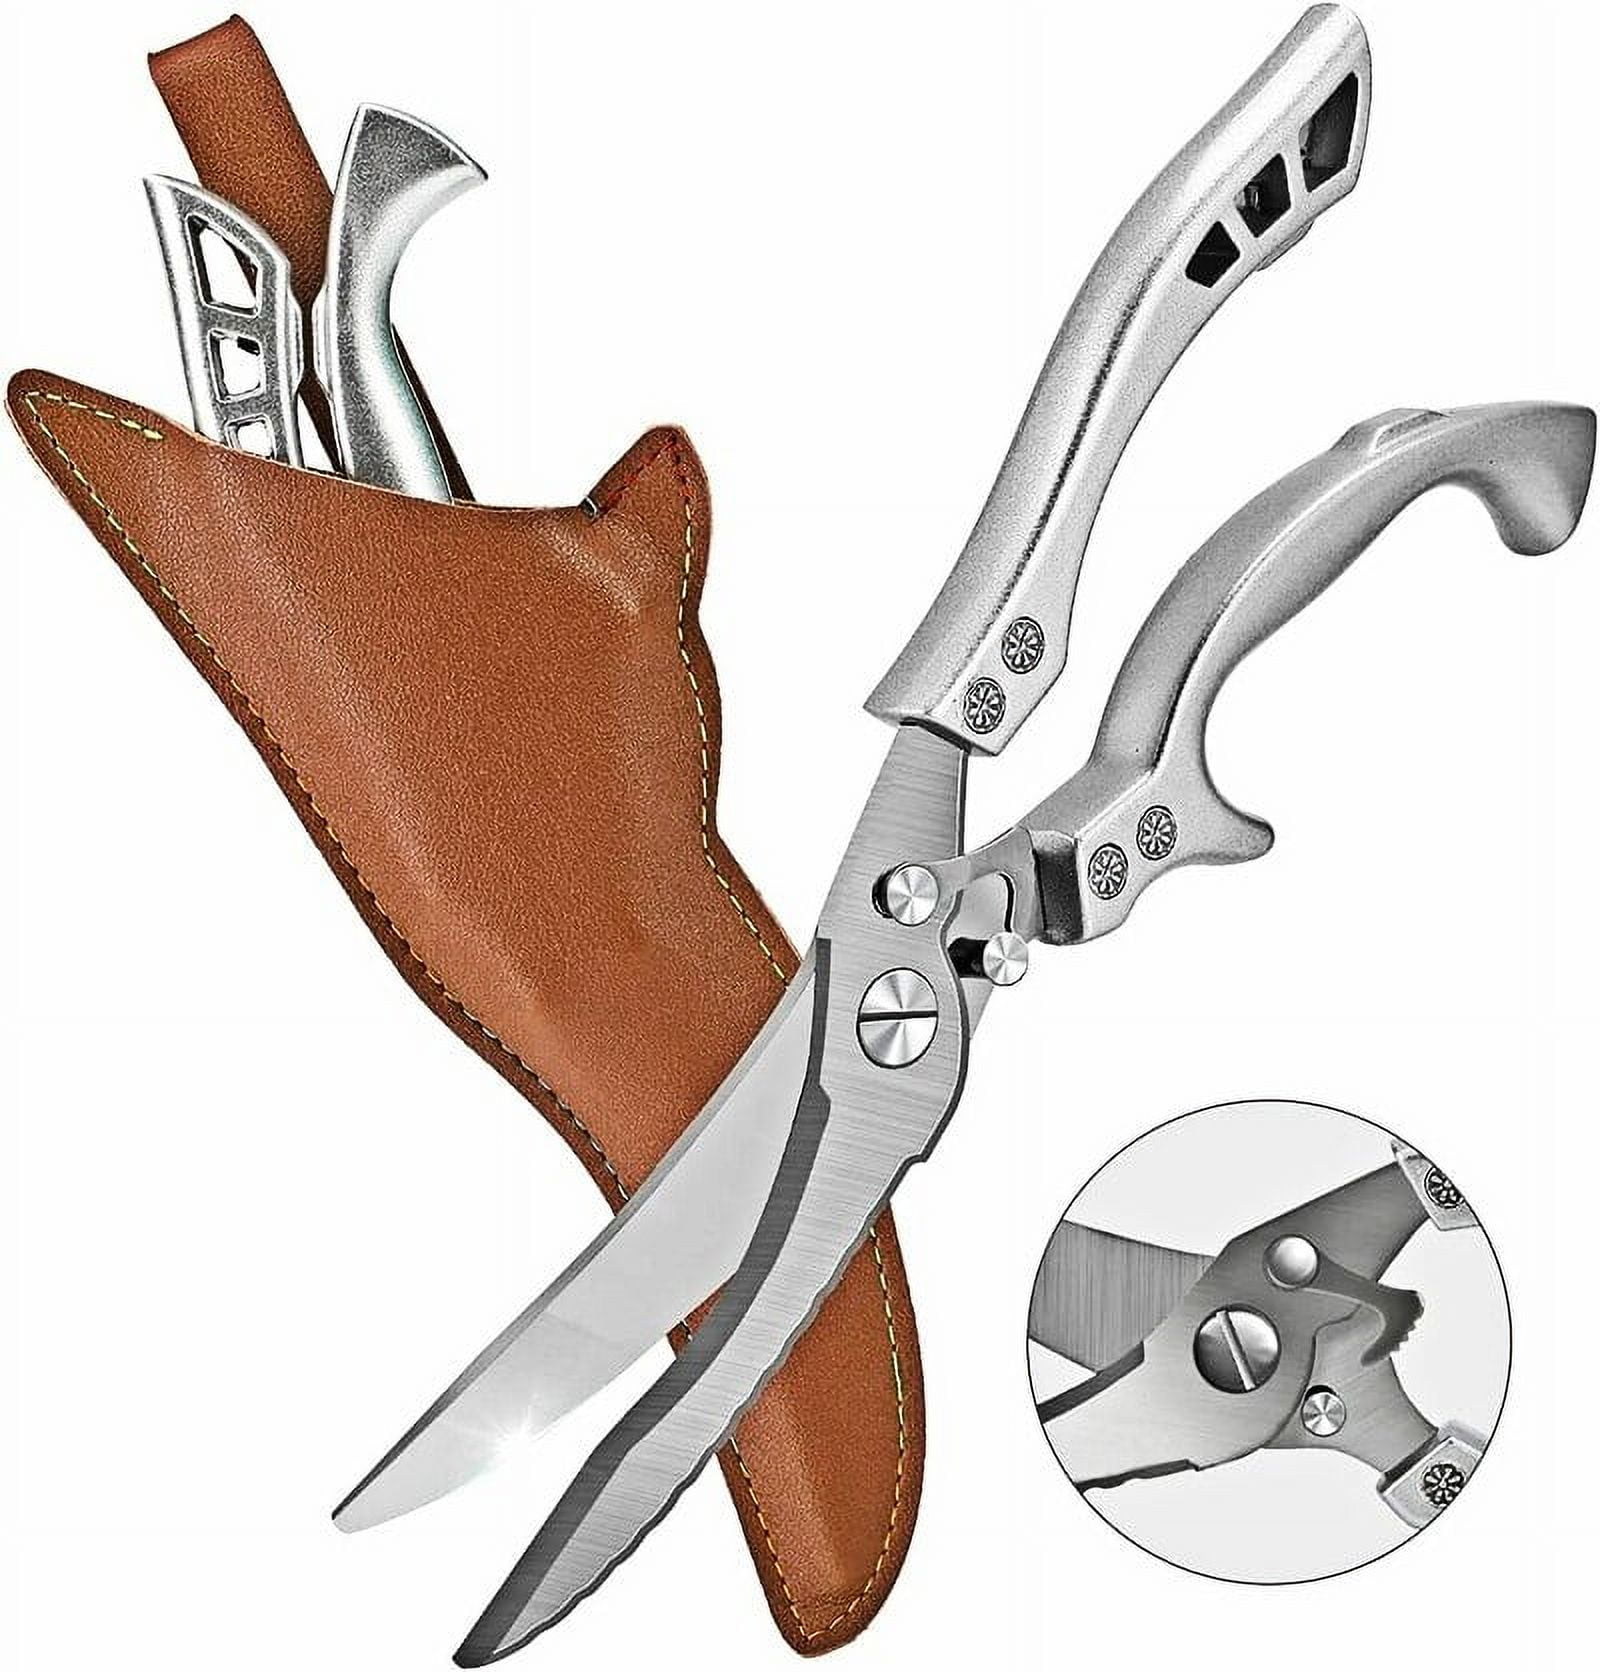 NEW Stainless Steel Poultry Kitchen Chicken Bone Scissor Fish Cutter Cook  Tool Shear Cut Duck Fish Meat Kitchen Gadgets